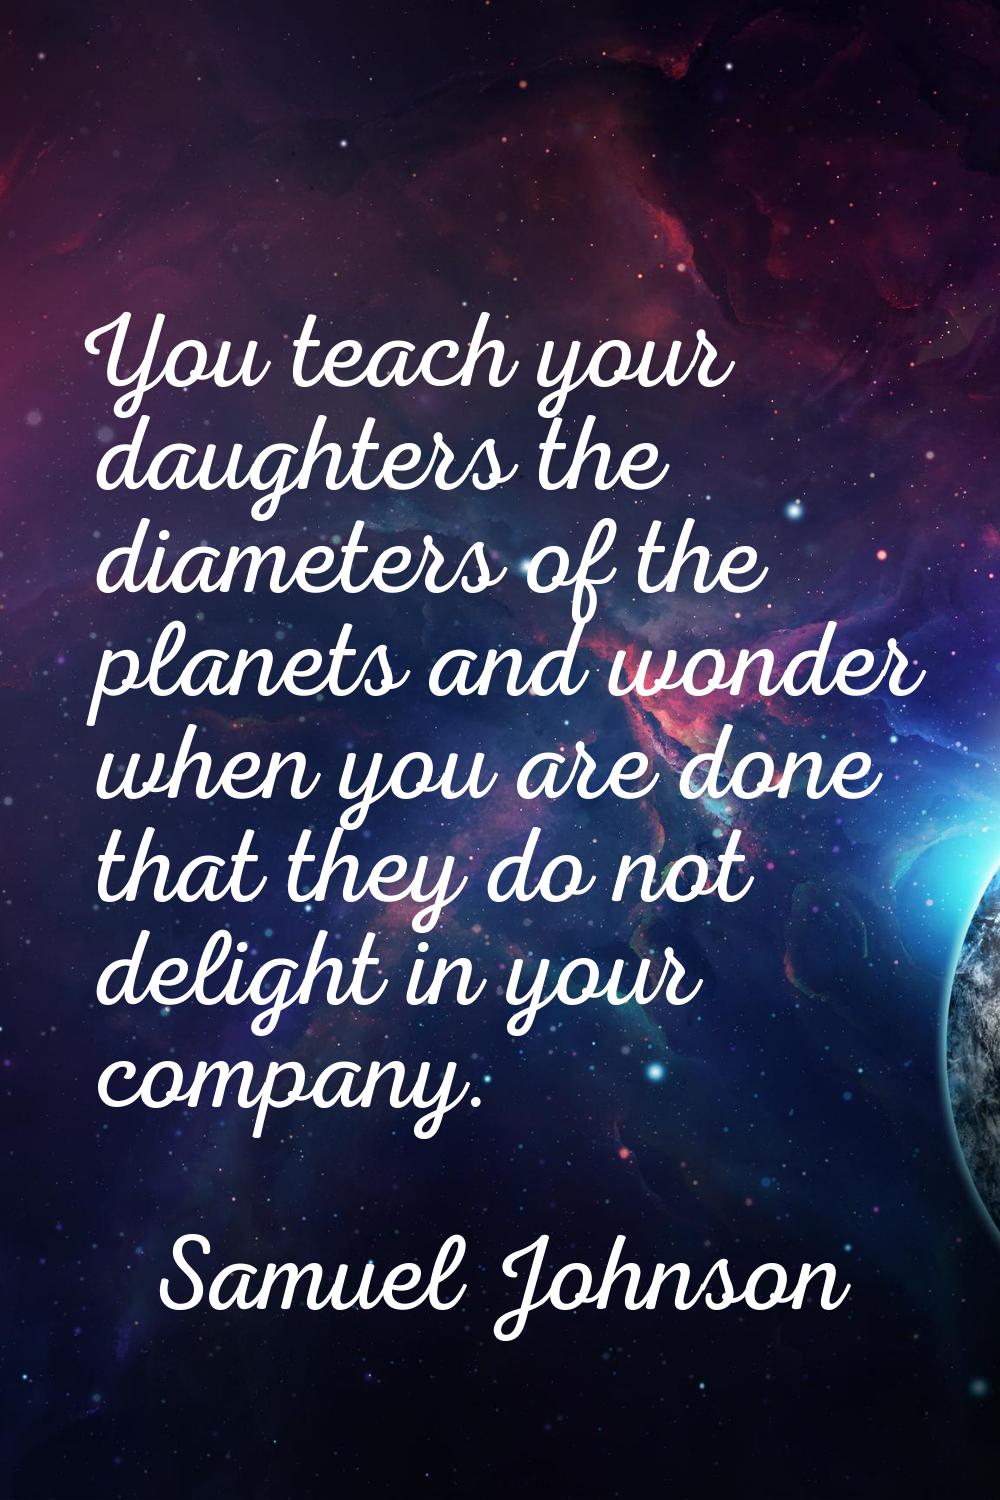 You teach your daughters the diameters of the planets and wonder when you are done that they do not